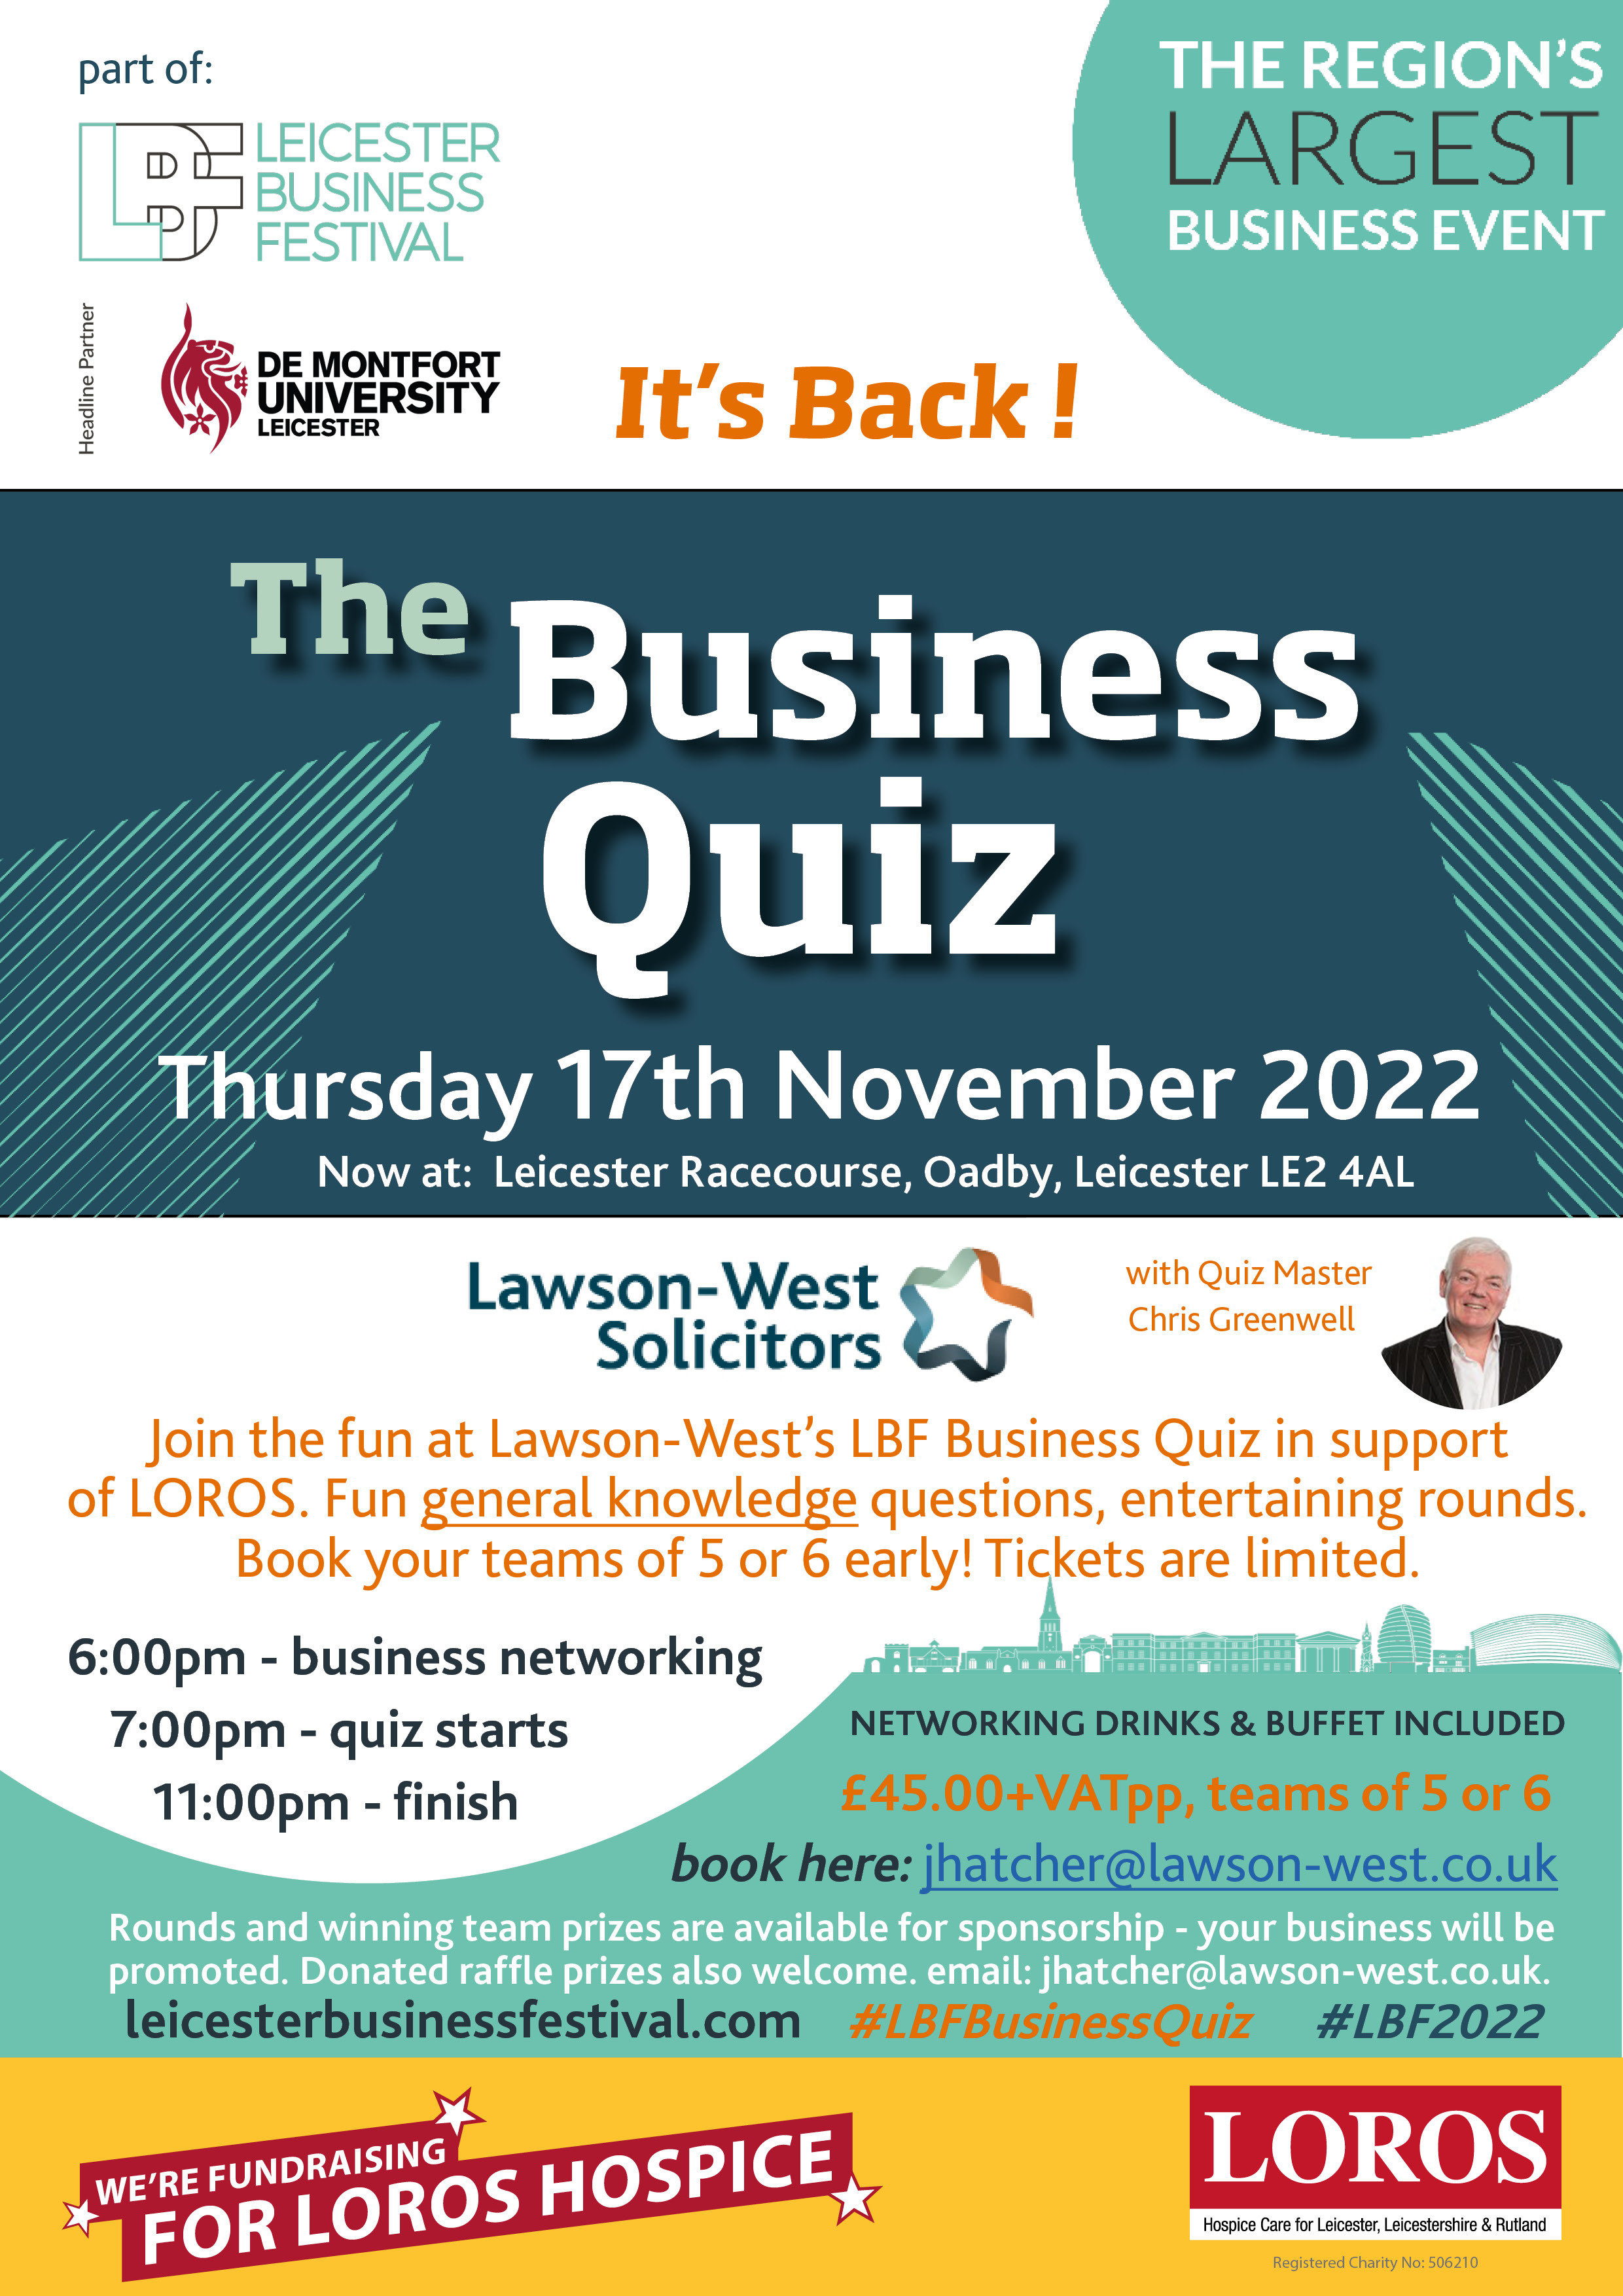 The Leicester Business Festival event Business Quiz 2022